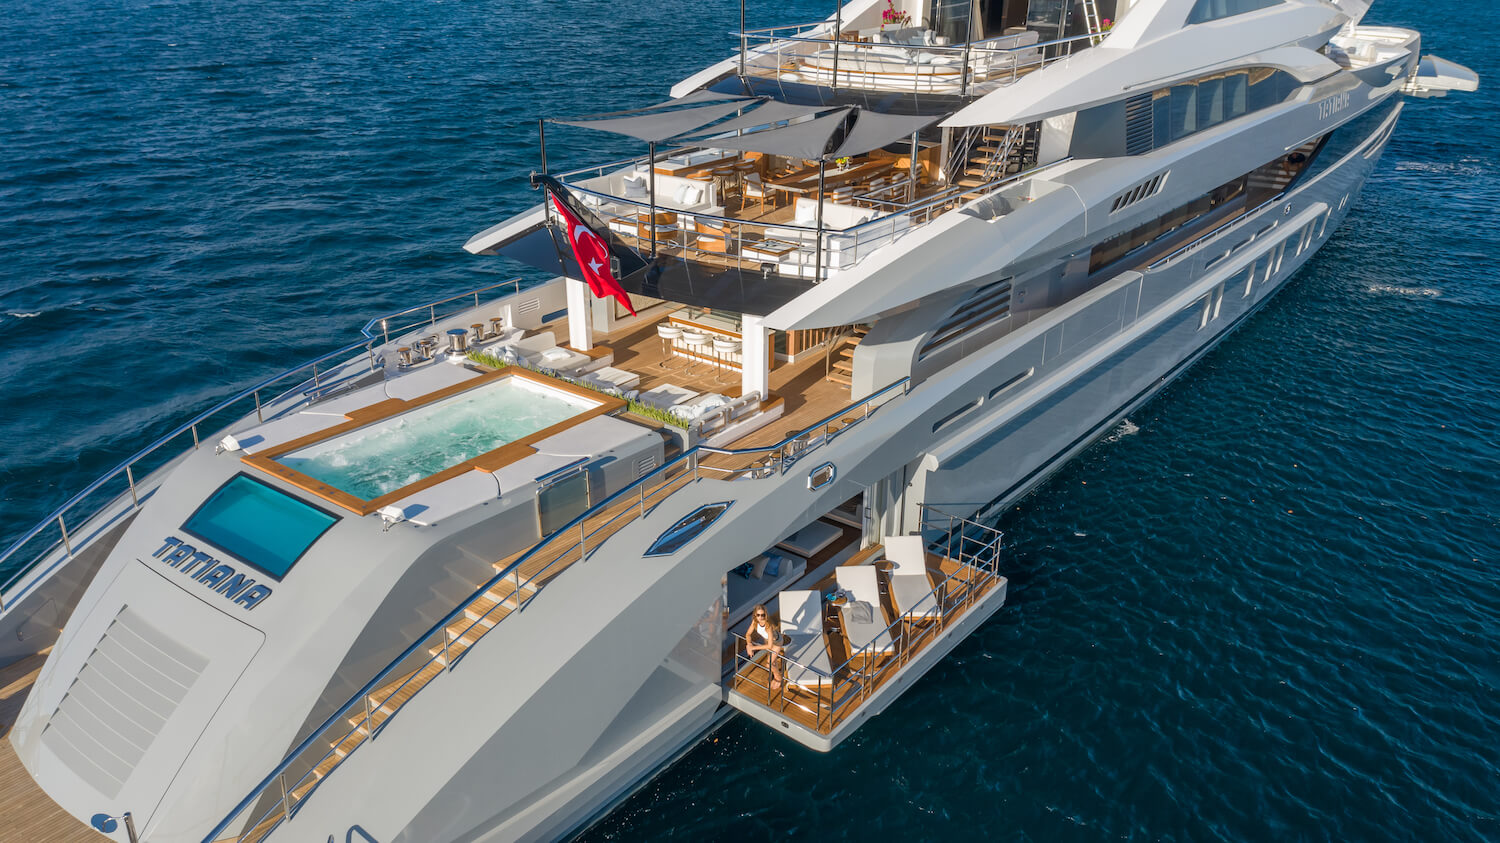 tatiana yacht charter aft deck aerial view - jacuzzi on a yacht charter in Croatia